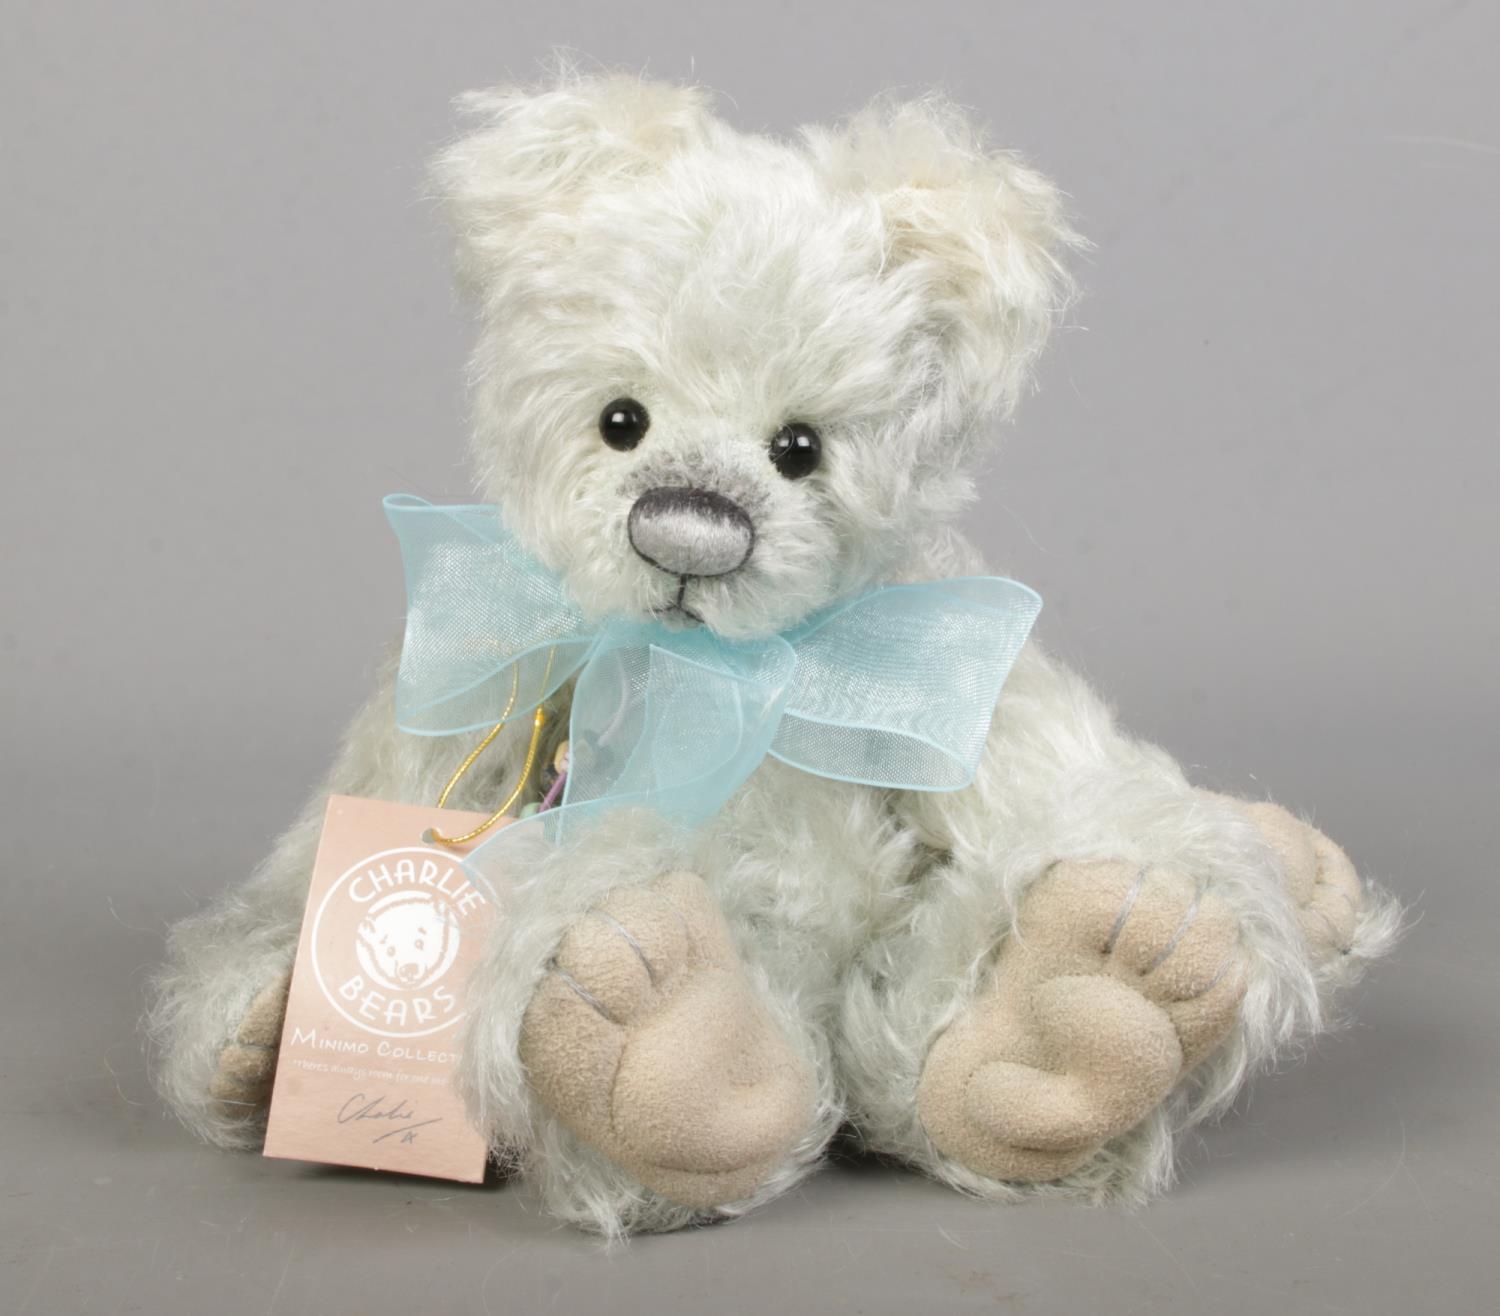 A Limited Edition Charlie Bears jointed teddy bear, Bubbles, from the Minimo collection. 81/2000.